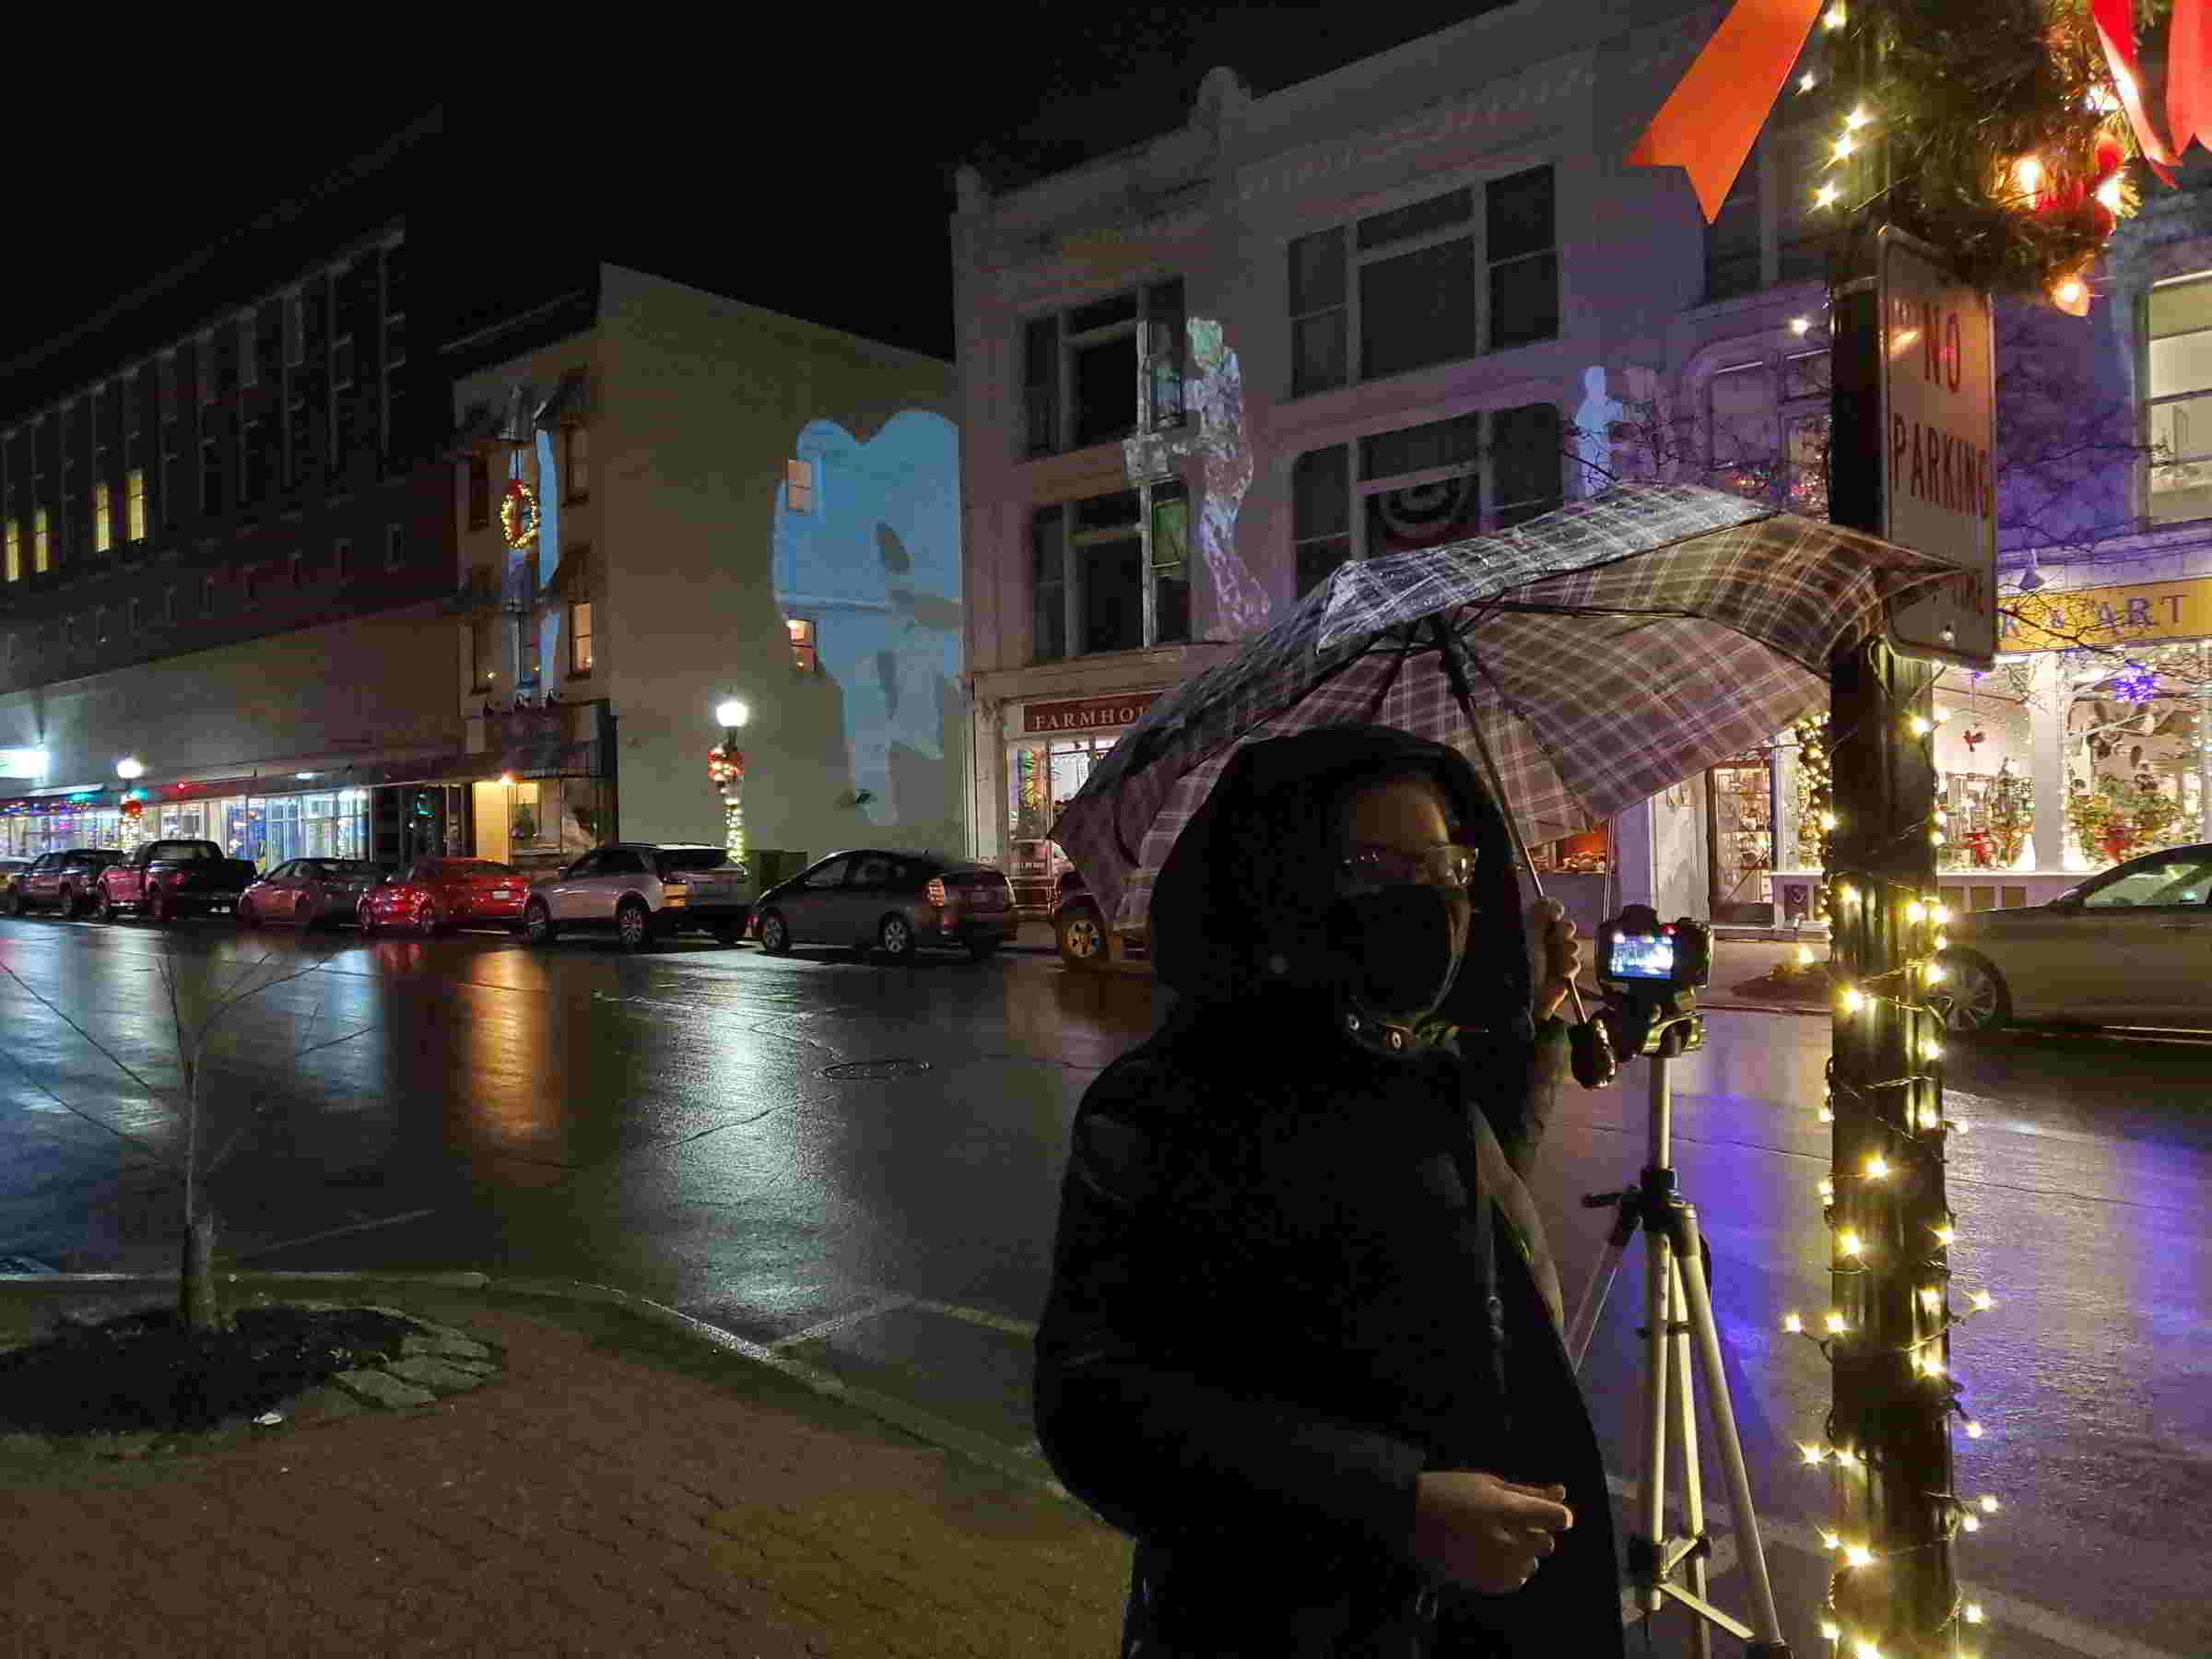 Katarina in winter jacket with umbrella in front of camera stand with pictures of dancers projected across the street.